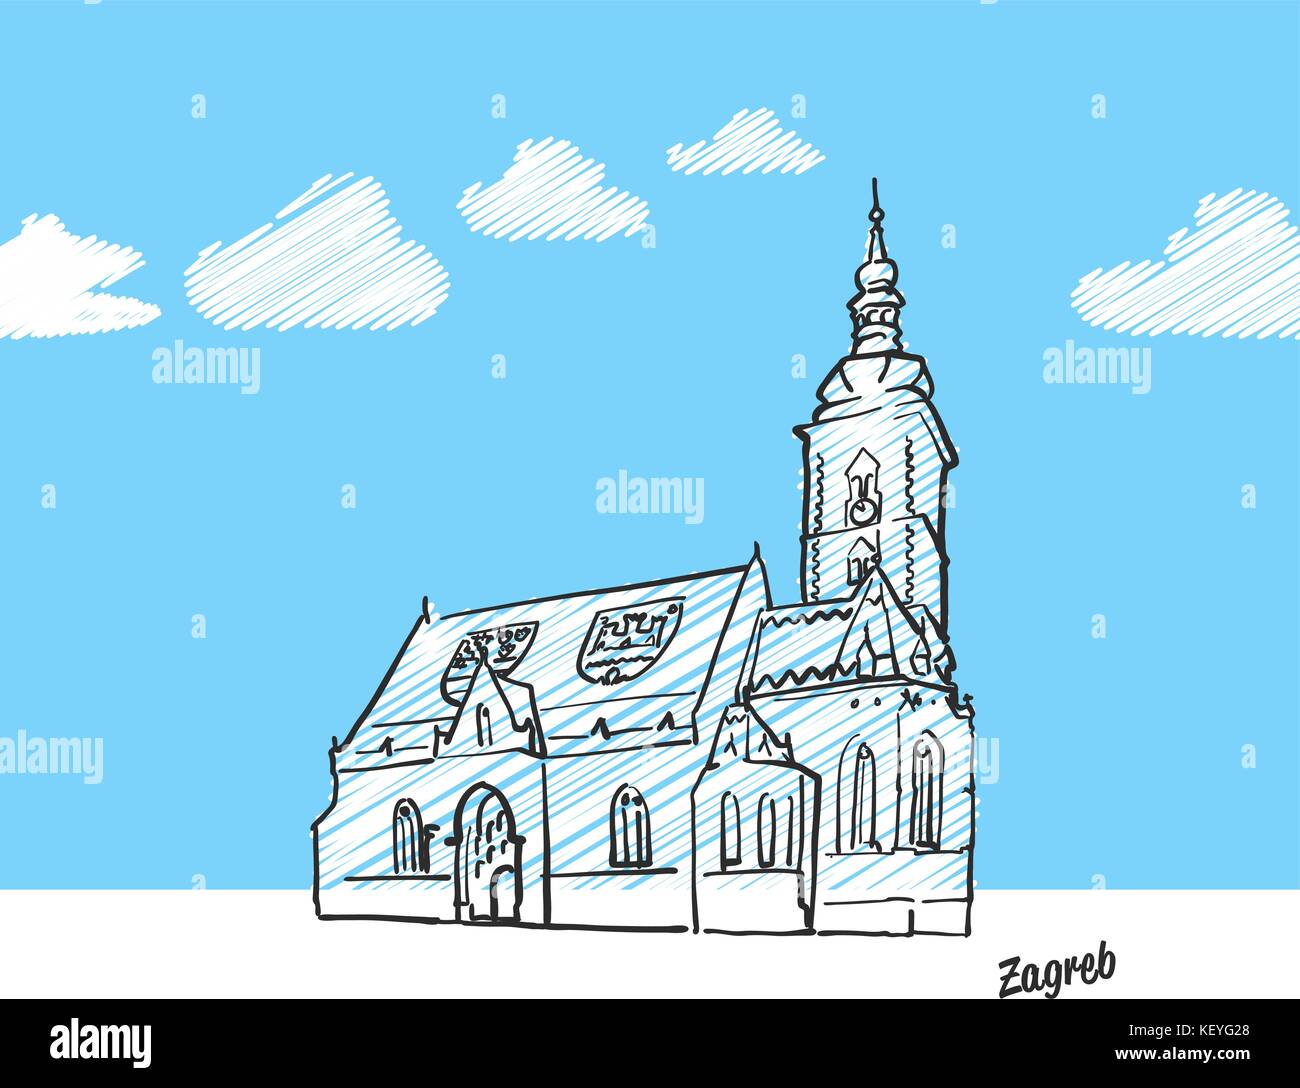 Zagreb, Croatia famous landmark sketch. Lineart drawing by hand. Greeting card icon with title, vector illustration Stock Vector